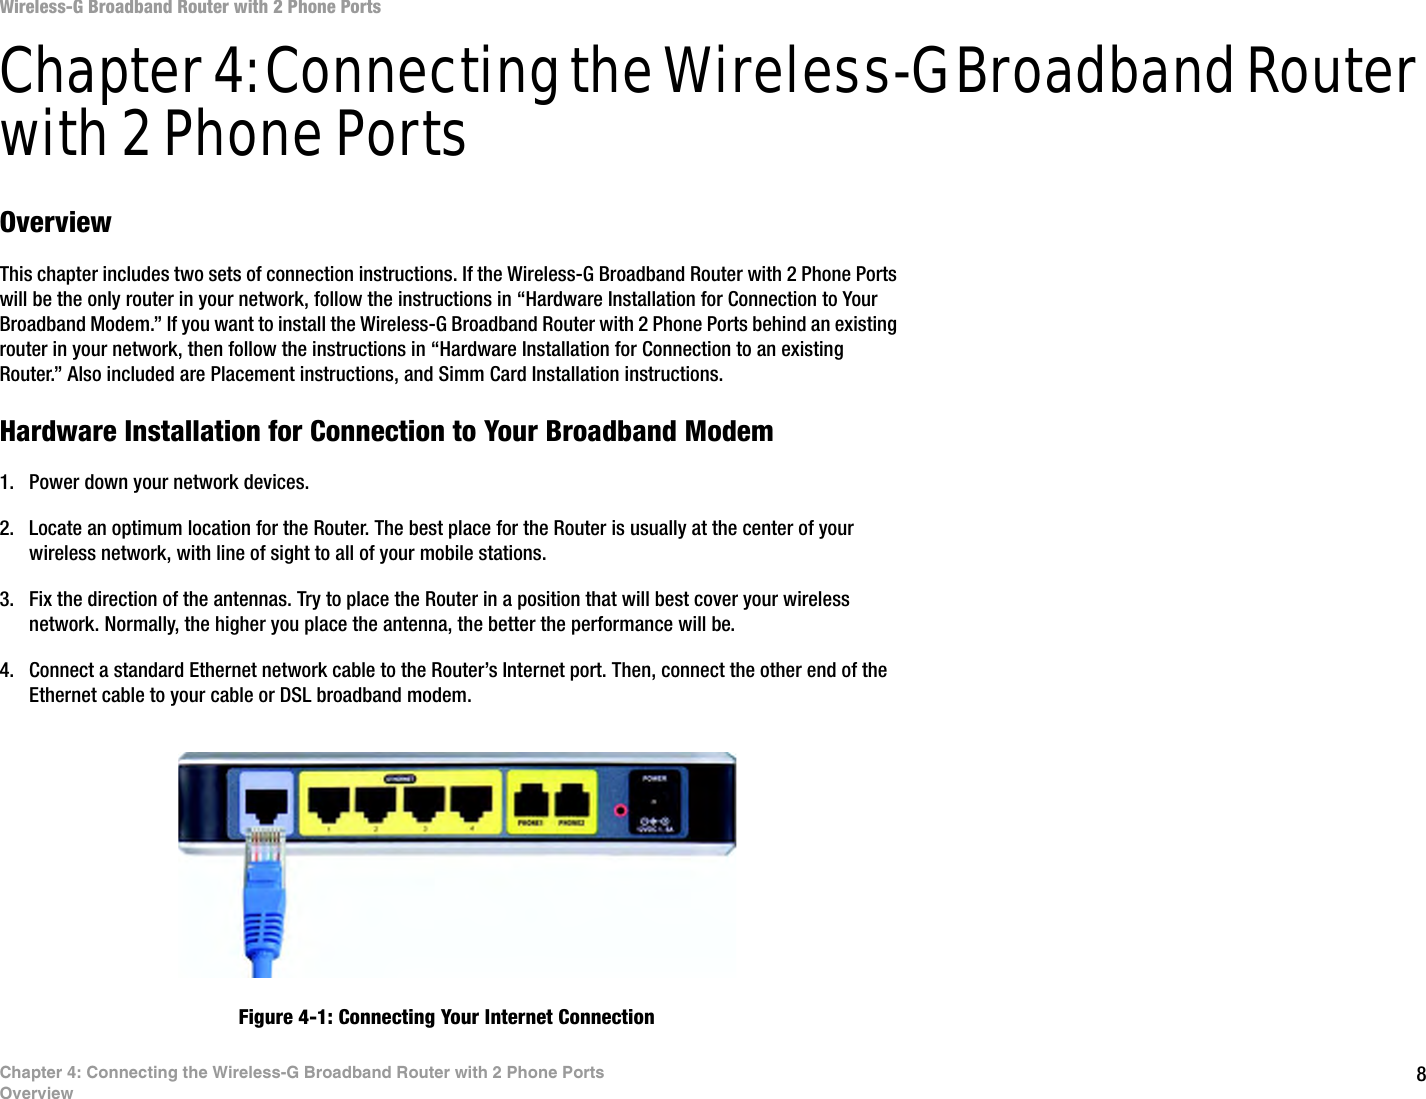 8Chapter 4: Connecting the Wireless-G Broadband Router with 2 Phone PortsOverviewWireless-G Broadband Router with 2 Phone PortsChapter 4: Connecting the Wireless-G Broadband Router with 2 Phone PortsOverviewThis chapter includes two sets of connection instructions. If the Wireless-G Broadband Router with 2 Phone Ports will be the only router in your network, follow the instructions in “Hardware Installation for Connection to Your Broadband Modem.” If you want to install the Wireless-G Broadband Router with 2 Phone Ports behind an existing router in your network, then follow the instructions in “Hardware Installation for Connection to an existing Router.” Also included are Placement instructions, and Simm Card Installation instructions.Hardware Installation for Connection to Your Broadband Modem1. Power down your network devices.2. Locate an optimum location for the Router. The best place for the Router is usually at the center of your wireless network, with line of sight to all of your mobile stations.3. Fix the direction of the antennas. Try to place the Router in a position that will best cover your wireless network. Normally, the higher you place the antenna, the better the performance will be.4. Connect a standard Ethernet network cable to the Router’s Internet port. Then, connect the other end of the Ethernet cable to your cable or DSL broadband modem.Figure 4-1: Connecting Your Internet Connection